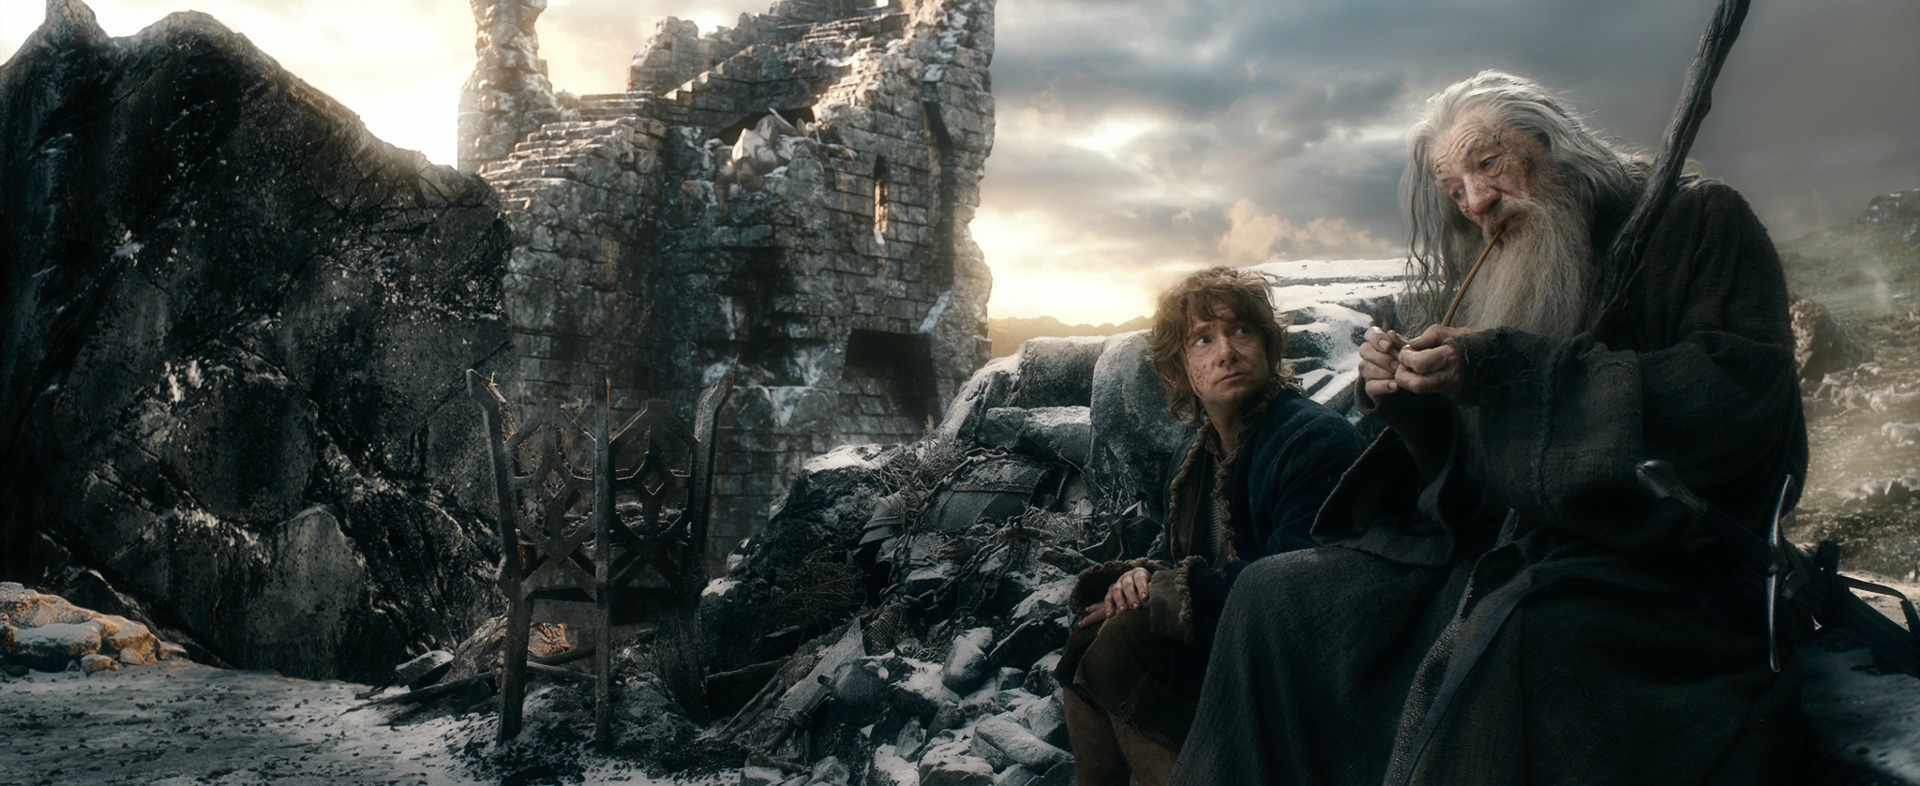 THE HOBBIT: THE BATTLE OF THE FIVE ARMIES (2014)